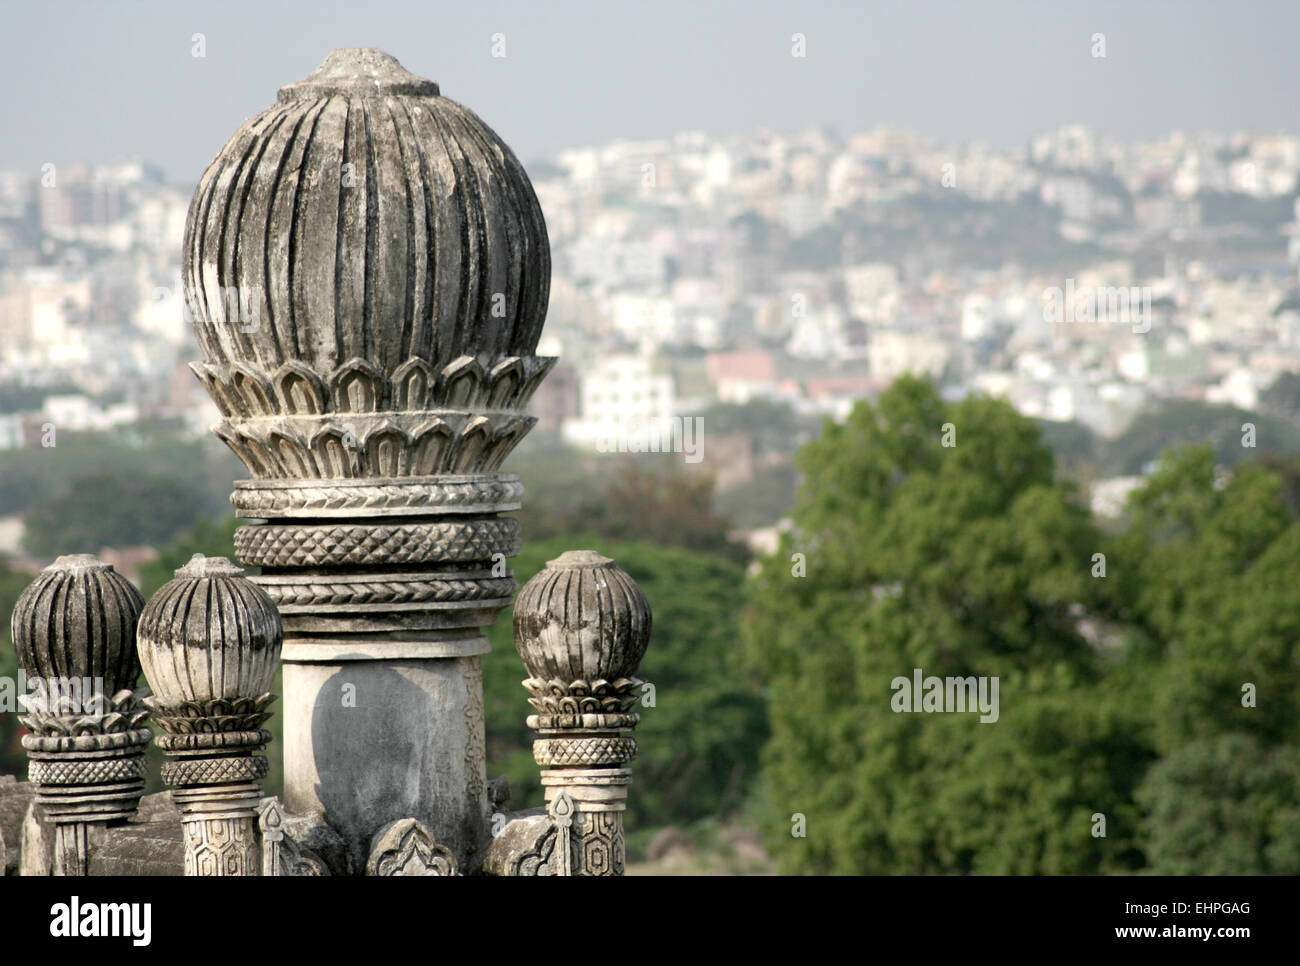 Architectural details of 400 year old ruined Golconda fort,Hyderabad,India Stock Photo